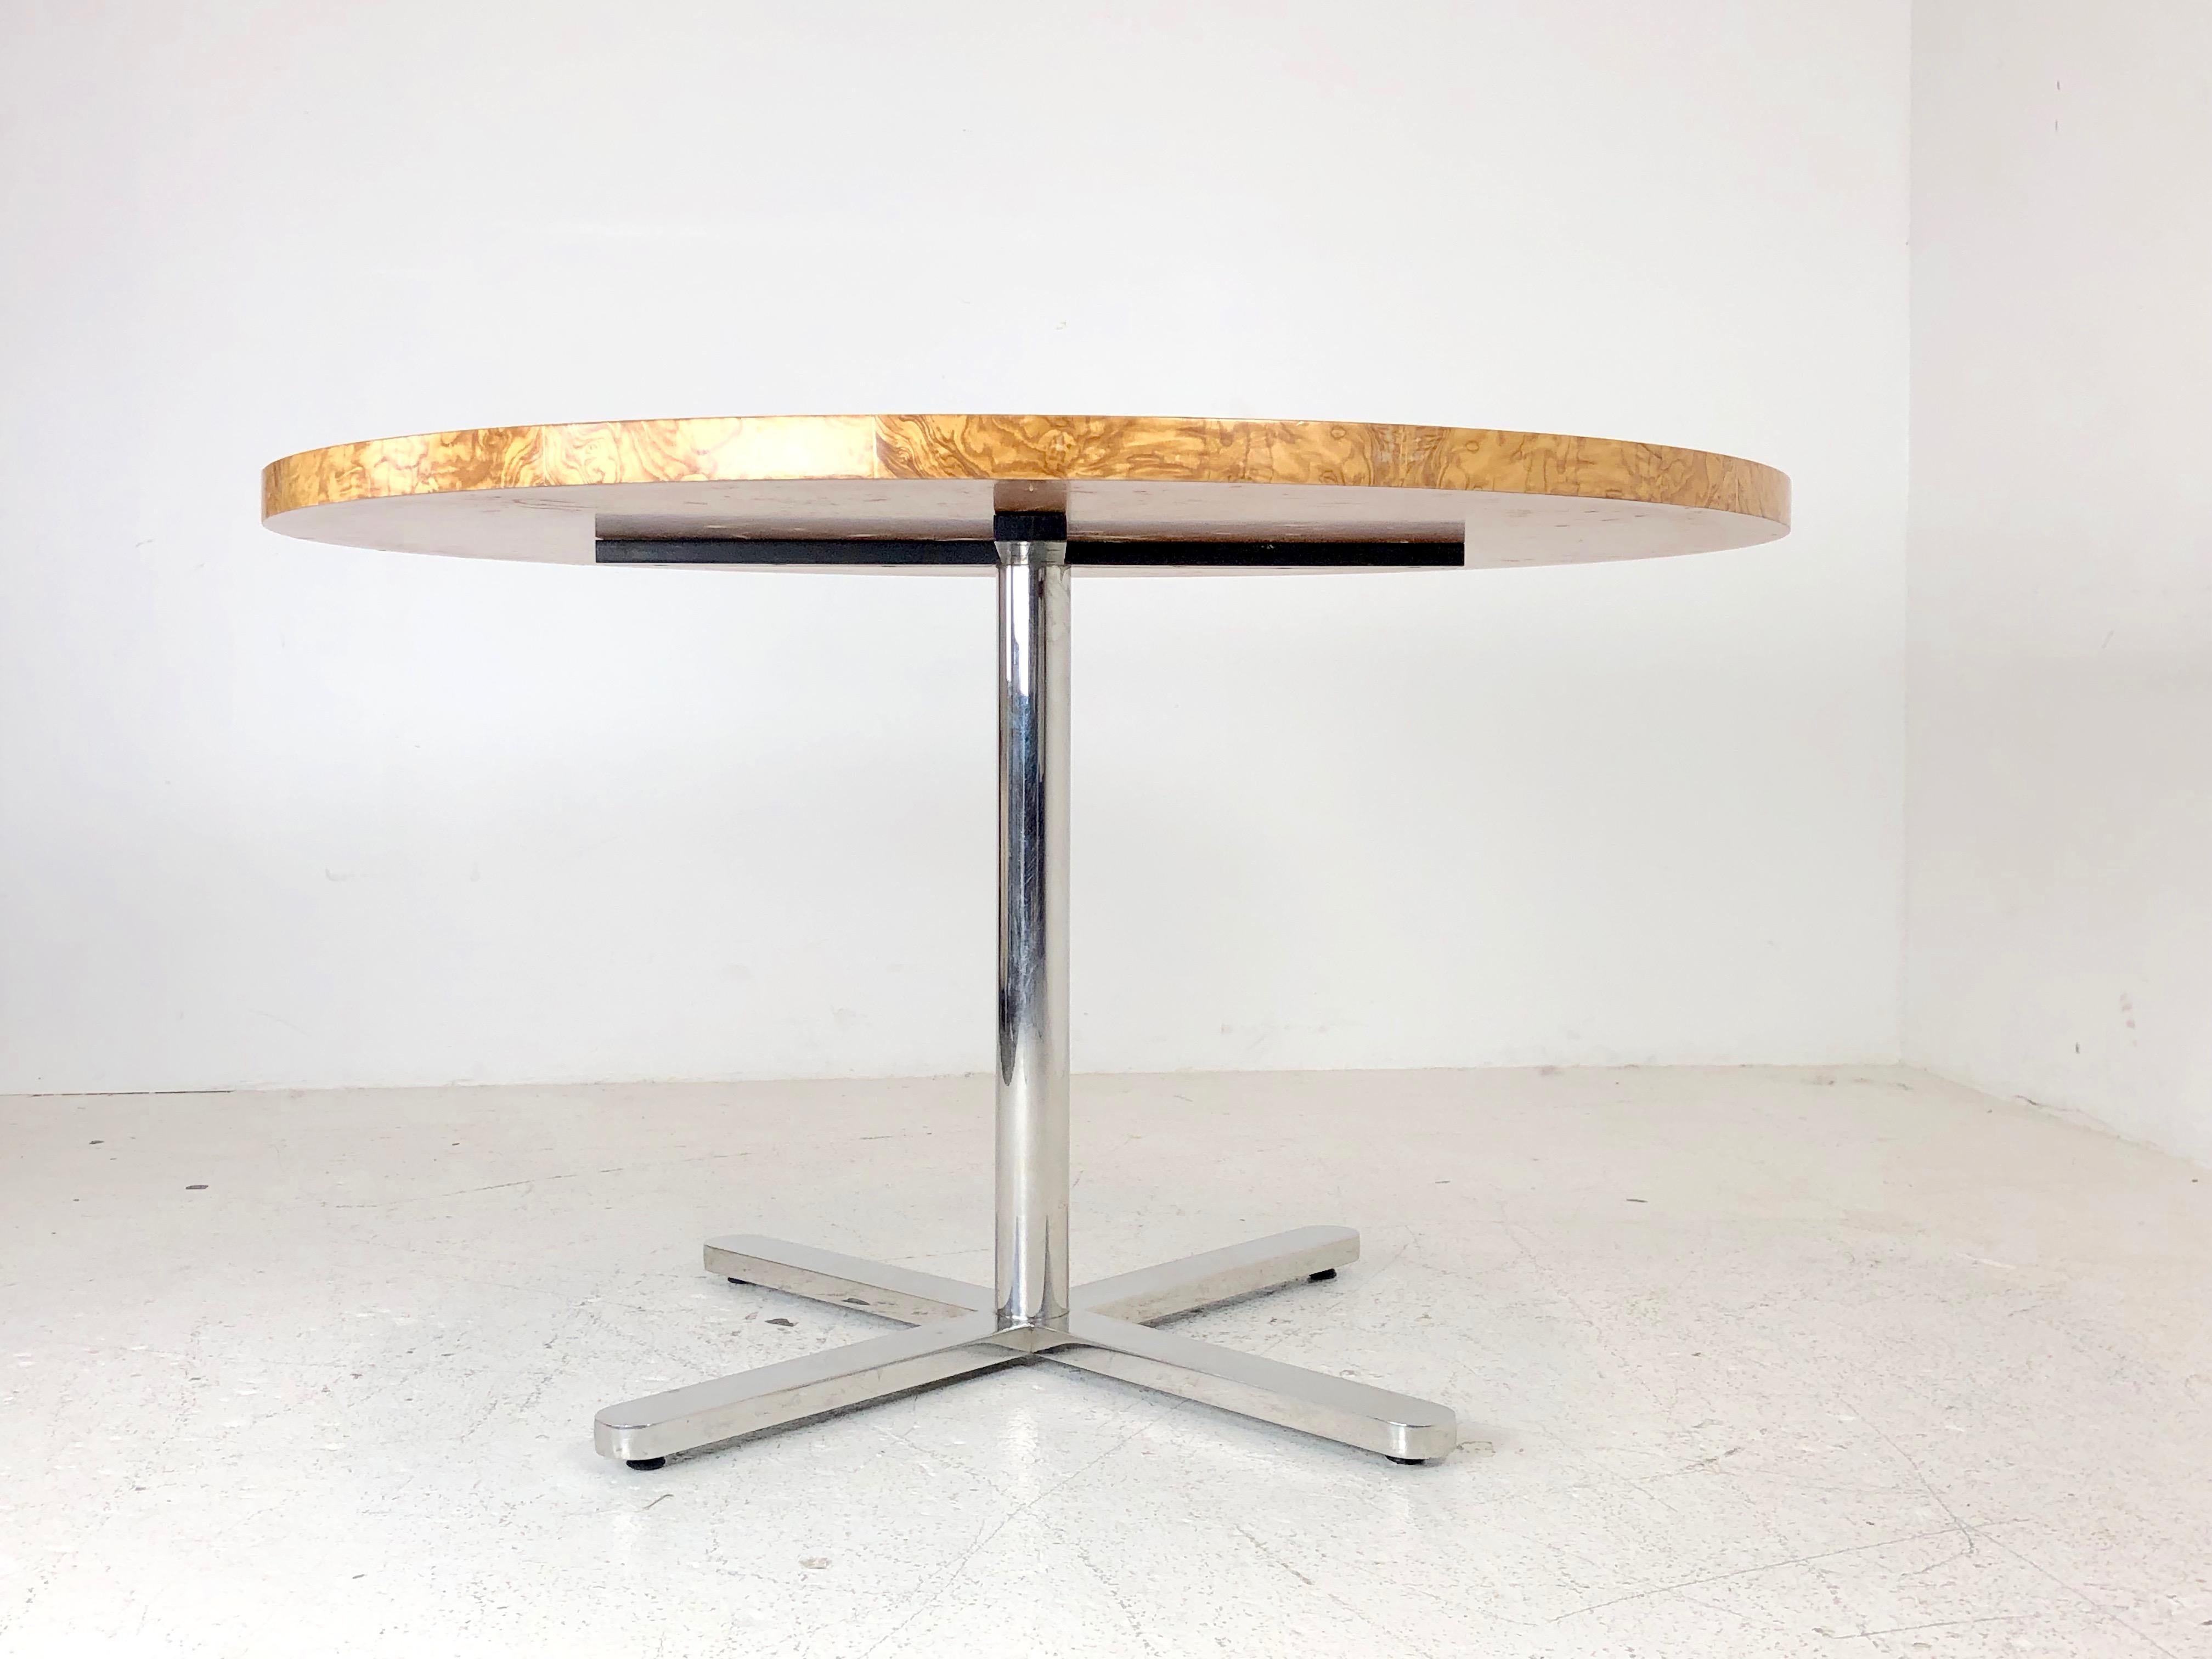 Contemporary Round Burl Wood Dining Table with Star Pedestal Base in the Style of Pace